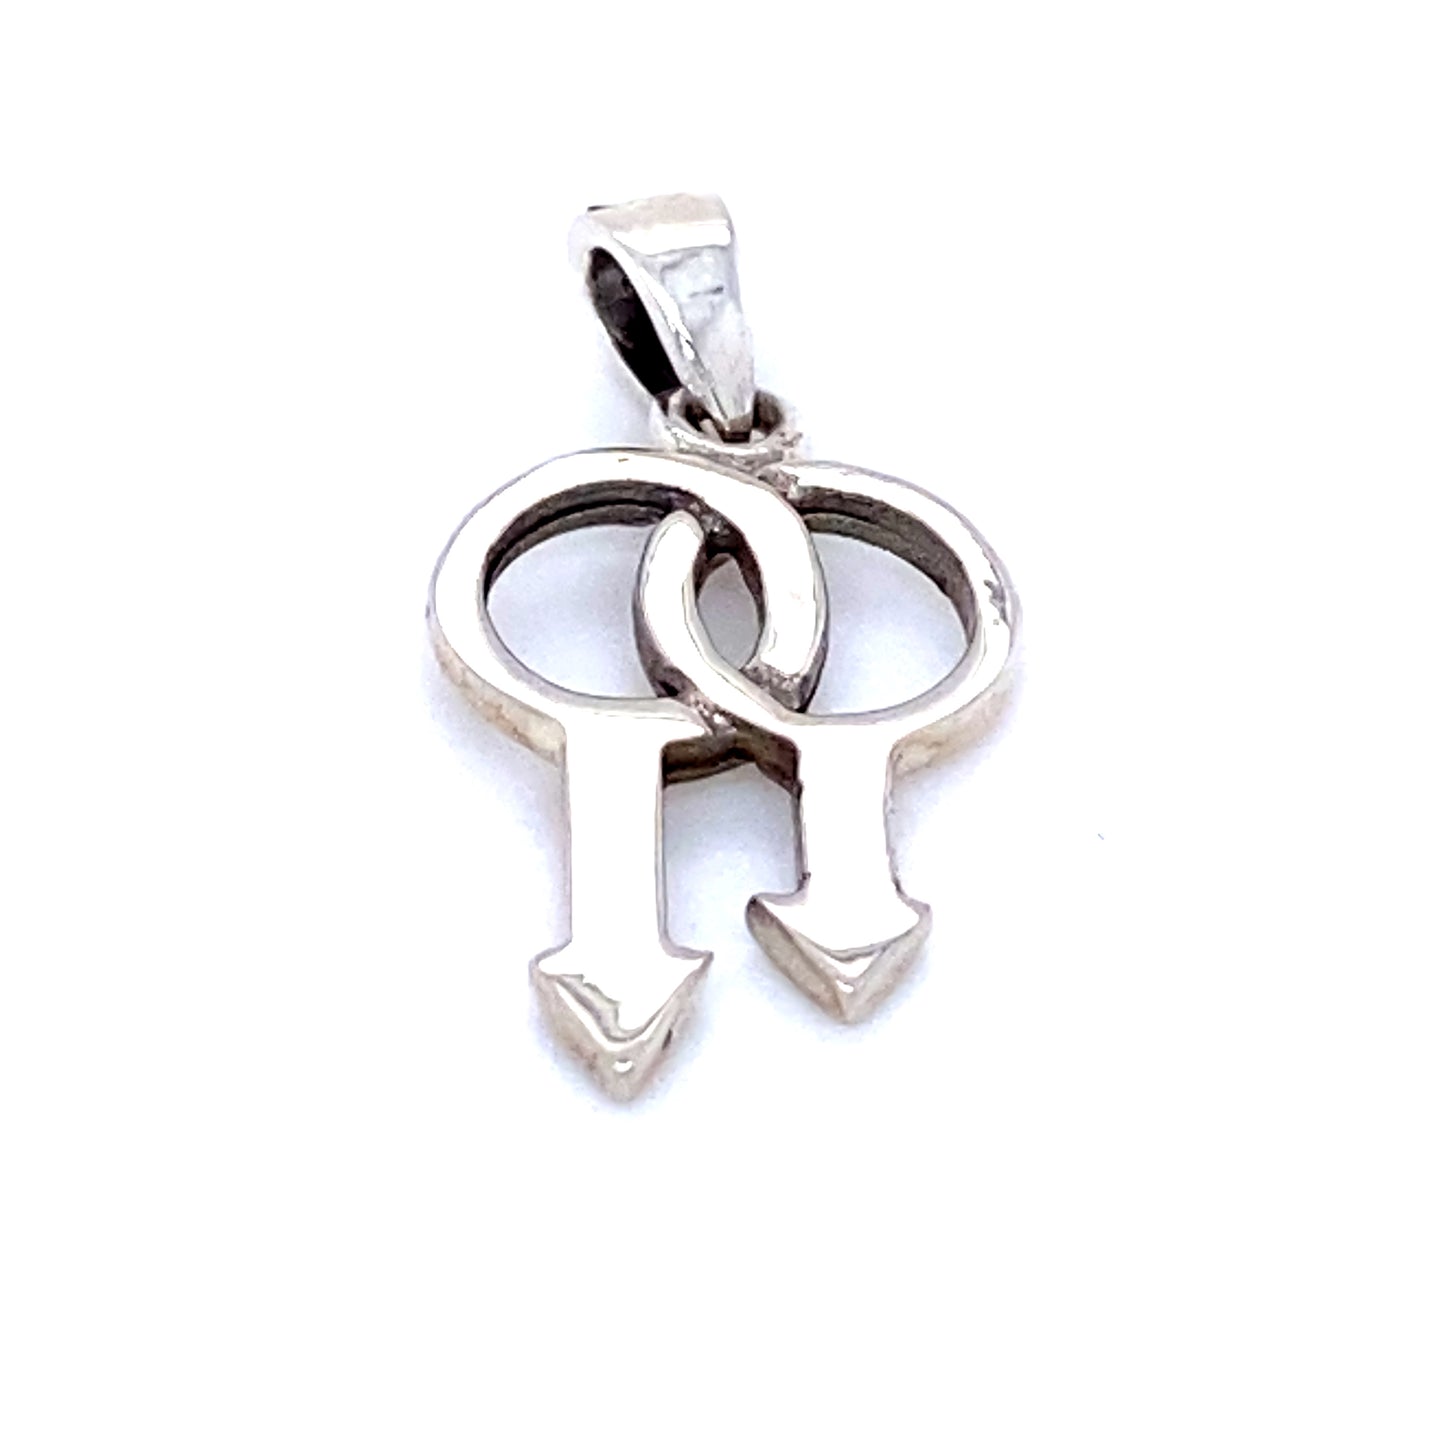 An interlocking pendant with a Double Mars Charm symbol by Super Silver.